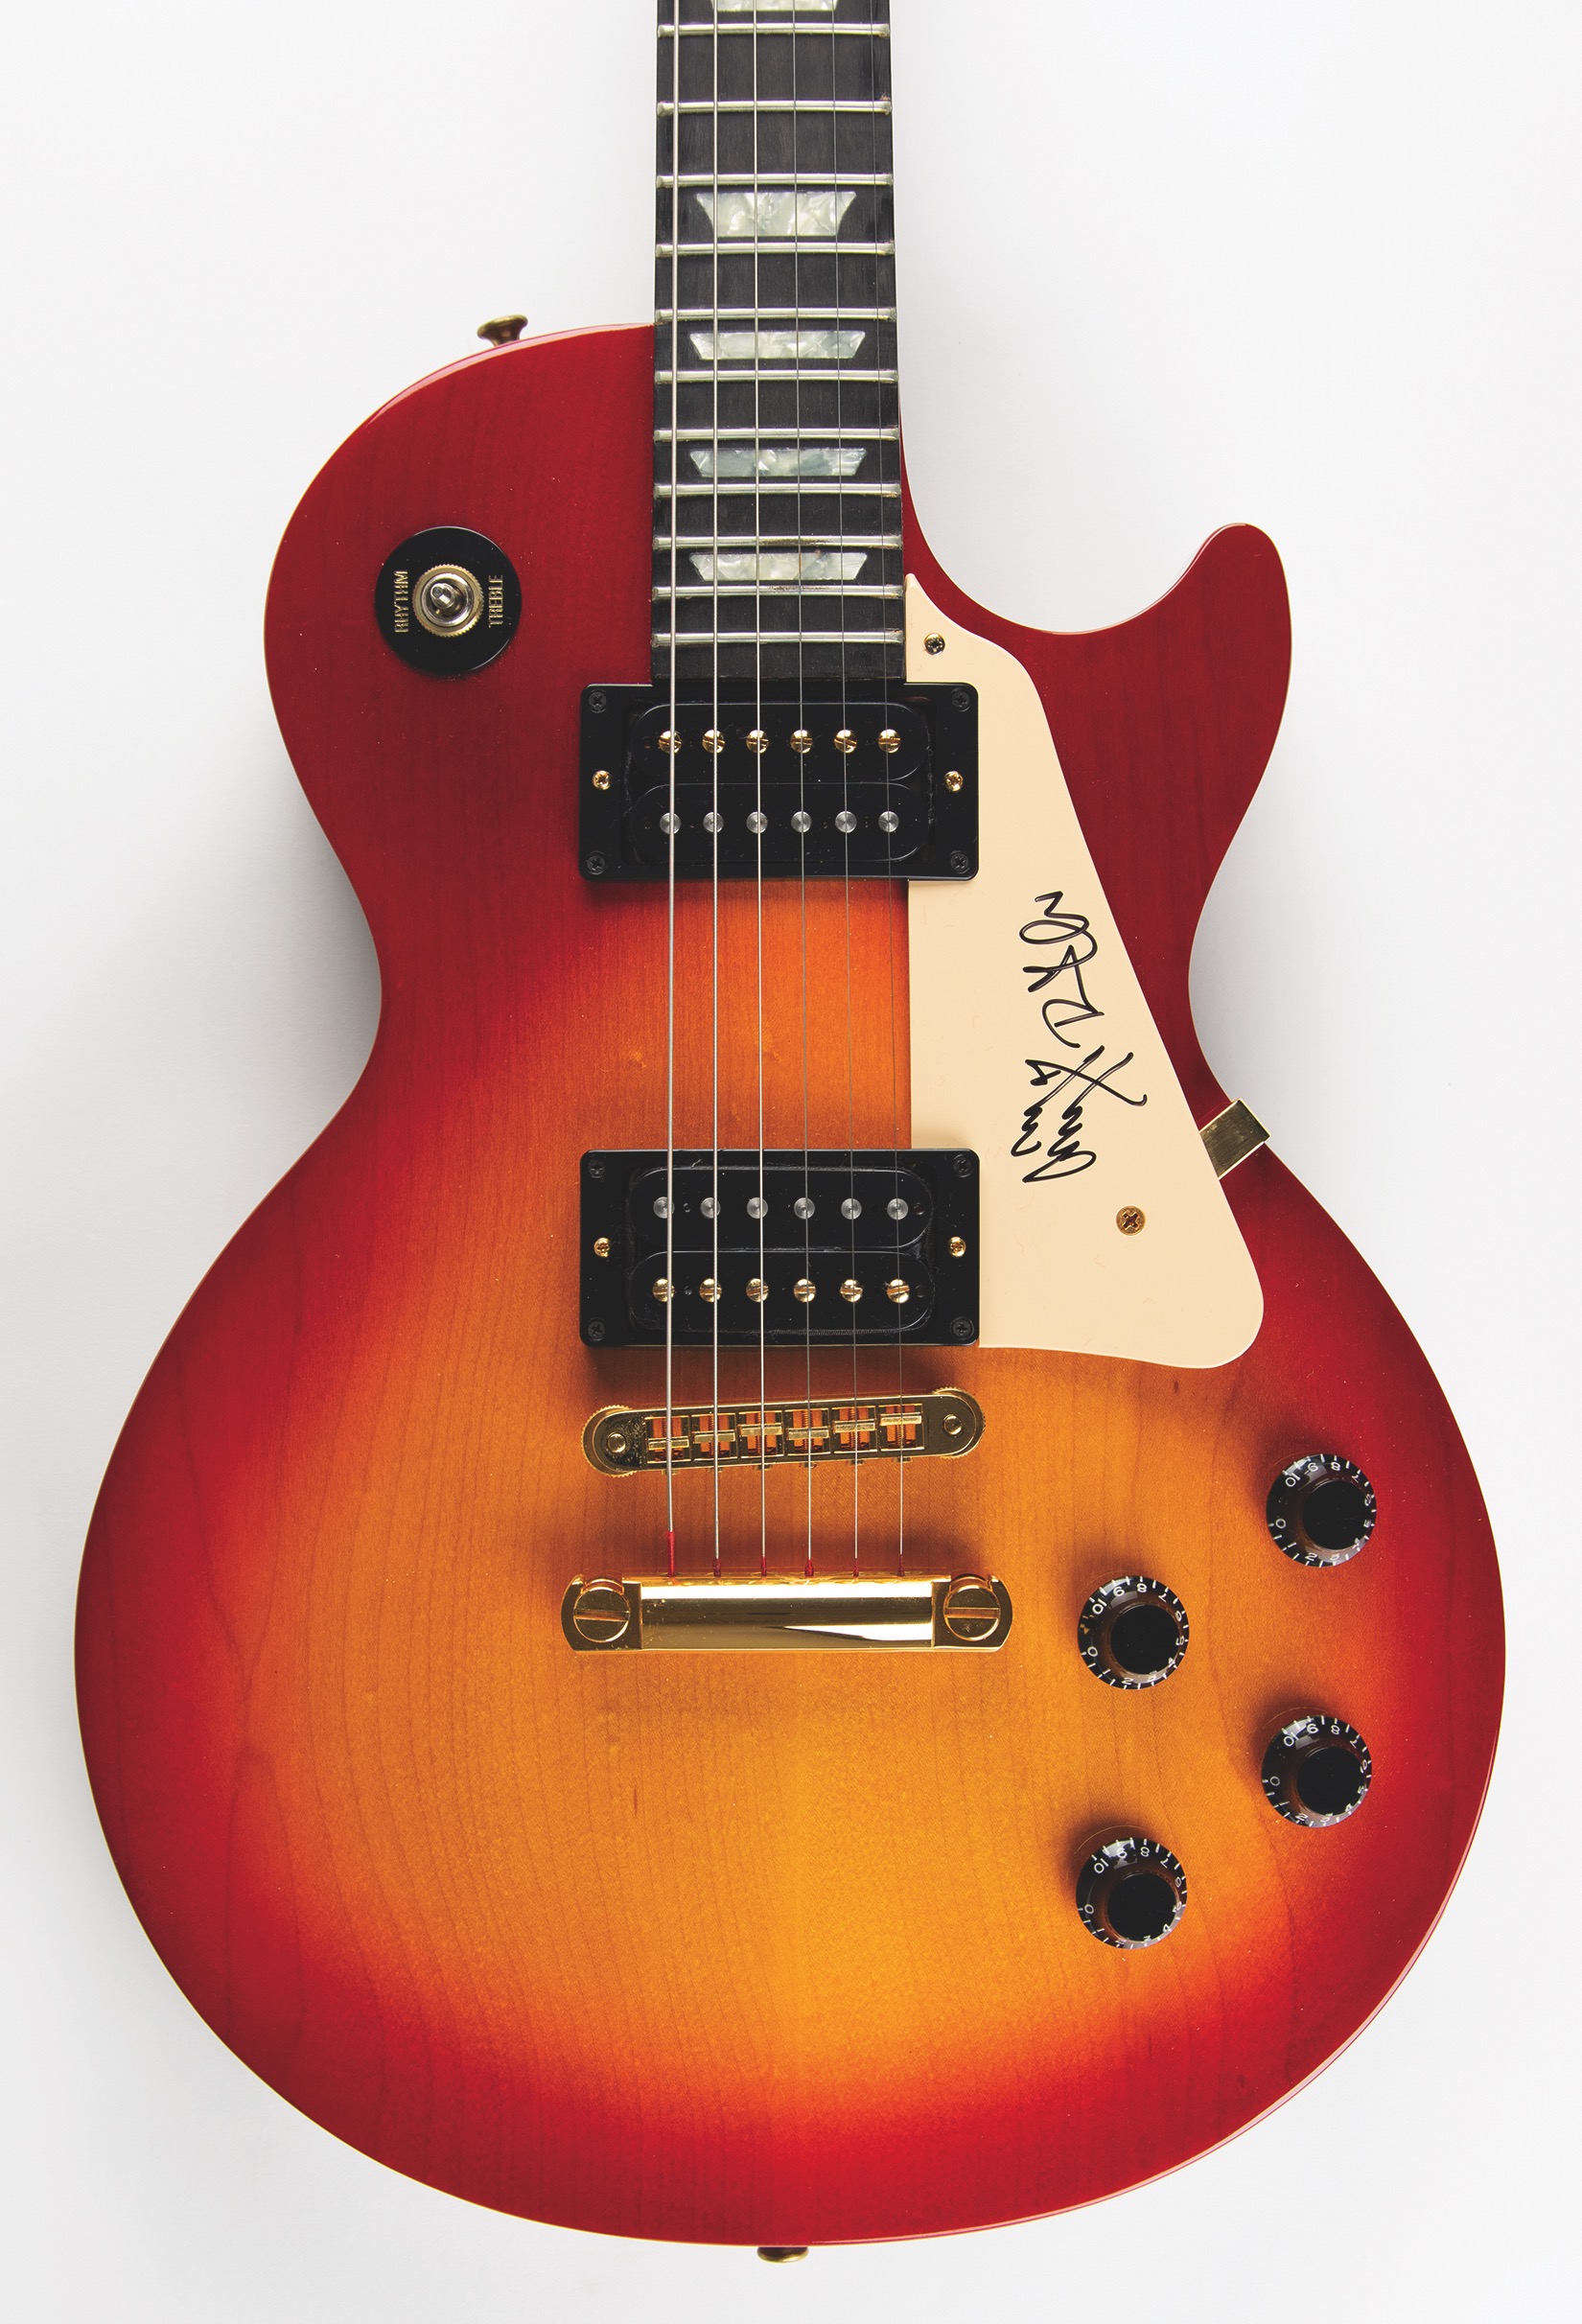 Lot #8162 Jimmy Page and Robert Plant Signed Limited Edition Gibson Les Paul Electric Guitar - Image 3